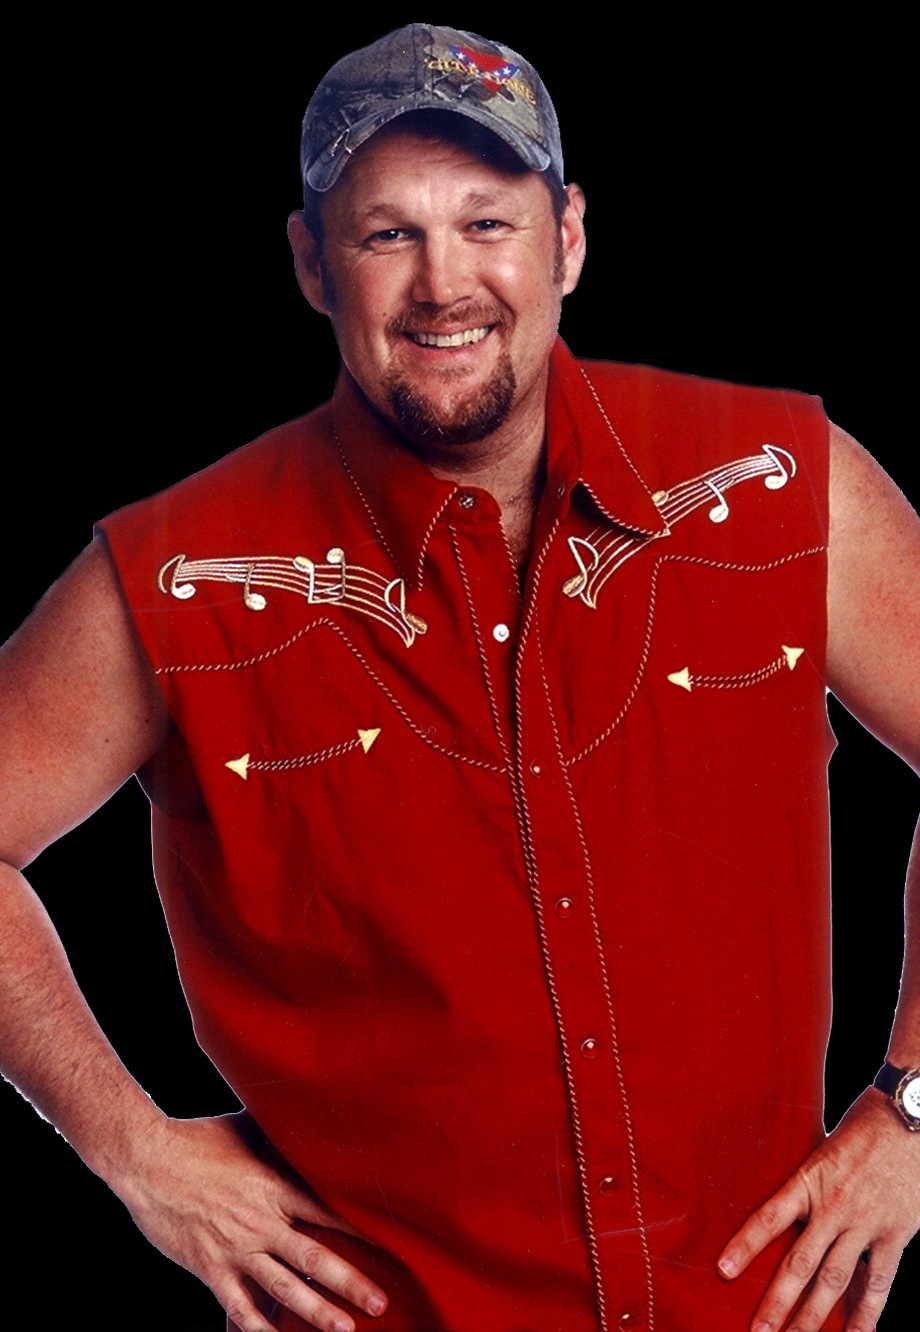 Larry the Cable Guy to perform April 8 at Purdue